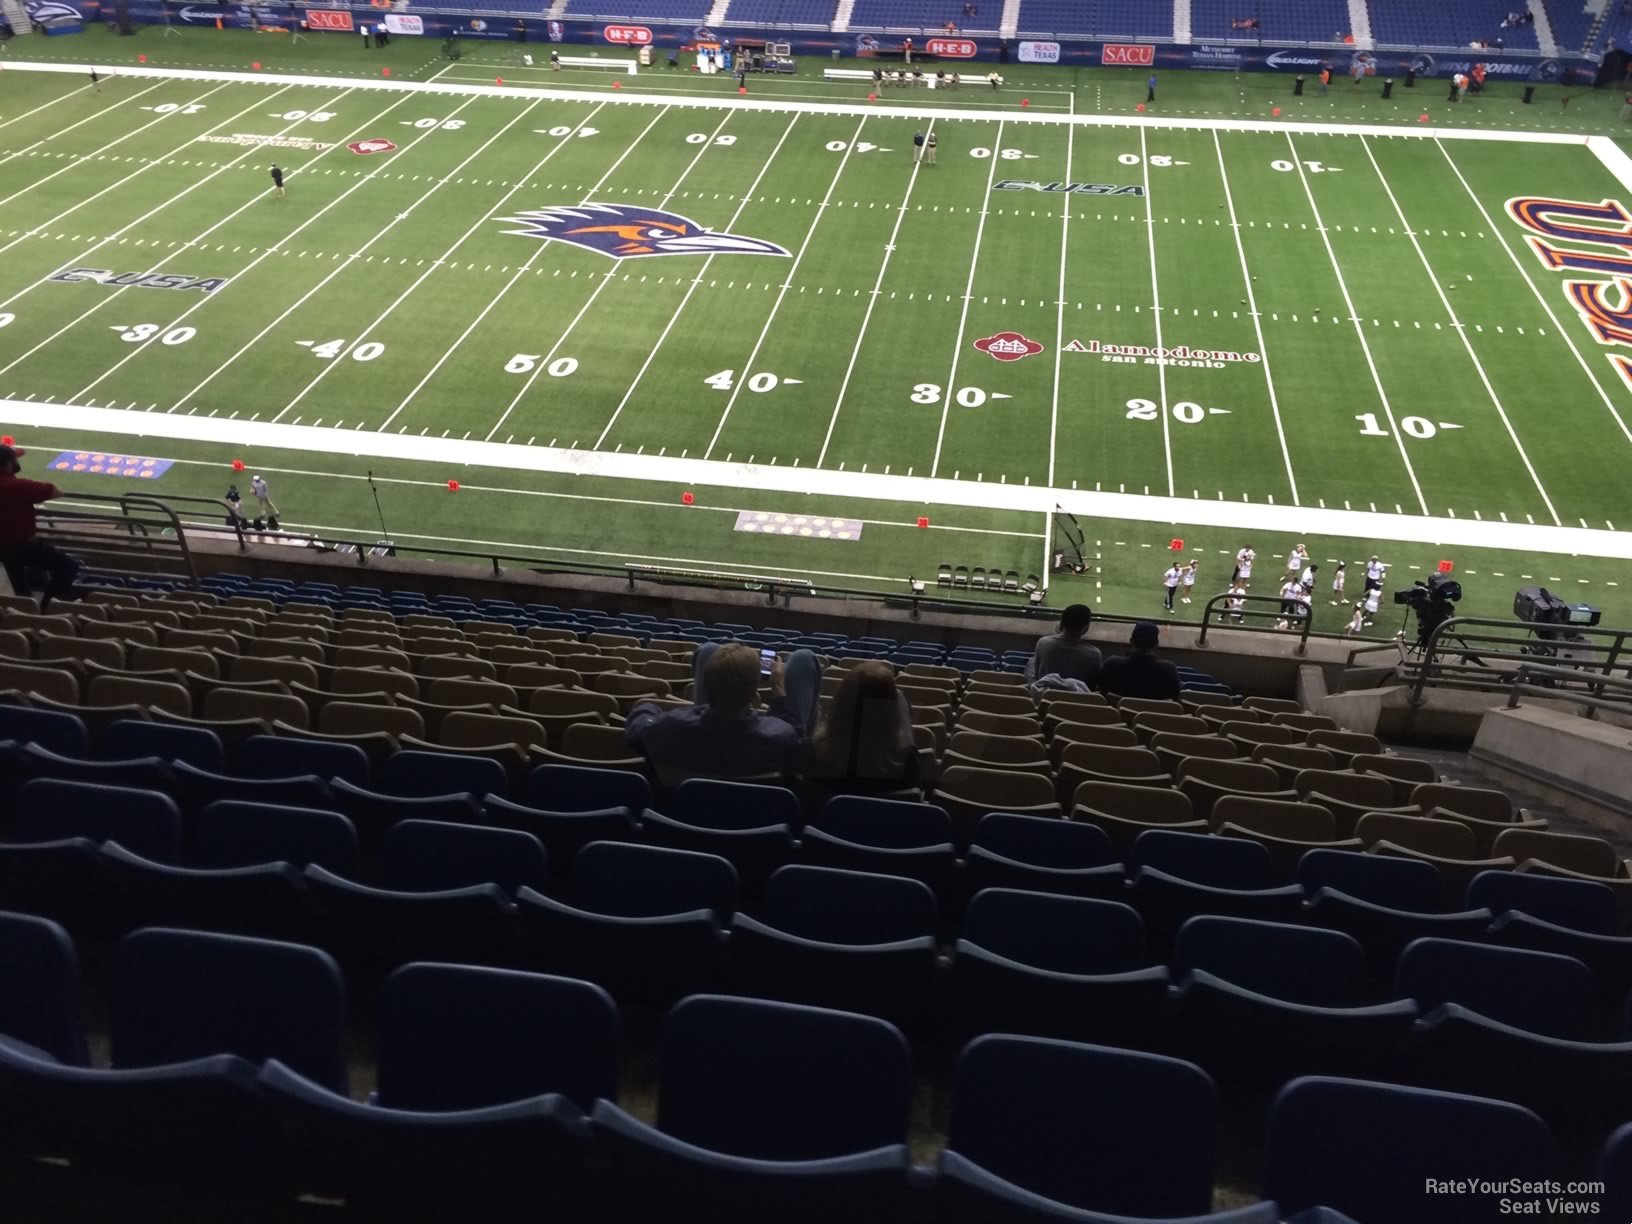 section 311, row 15 seat view  for football - alamodome